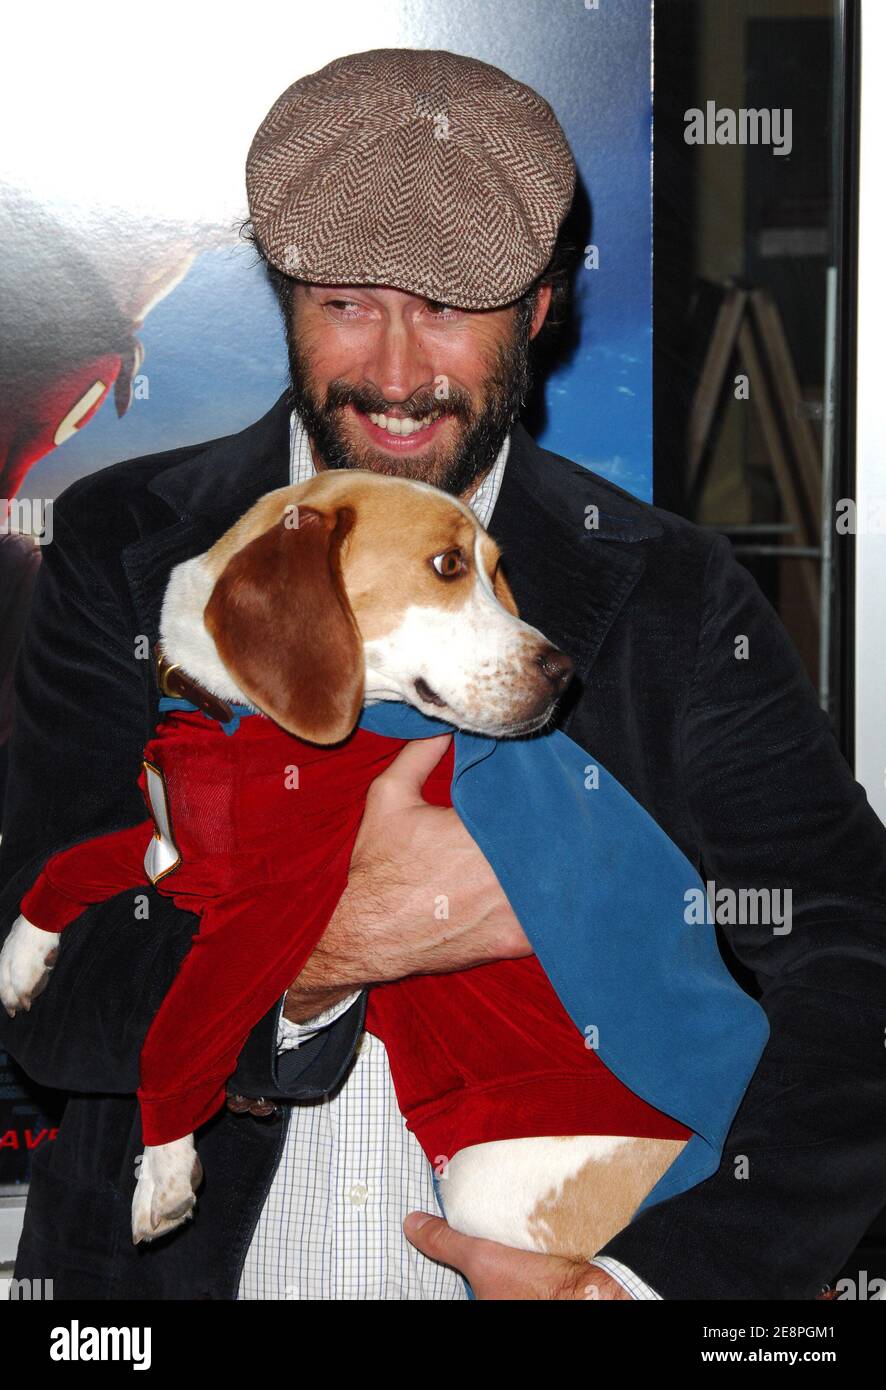 Actor Jason Lee poses with Leo the dog who plays Underdog in the film at the premiere of 'Underdog' held at the Regal E-Walk Stadium 13 theater on Monday, July 30, 2007 in New York City, USA. Photo by Gregorio Binuya/ABACAUSA.COM (Pictured: Jason Lee, Leo) Stock Photo